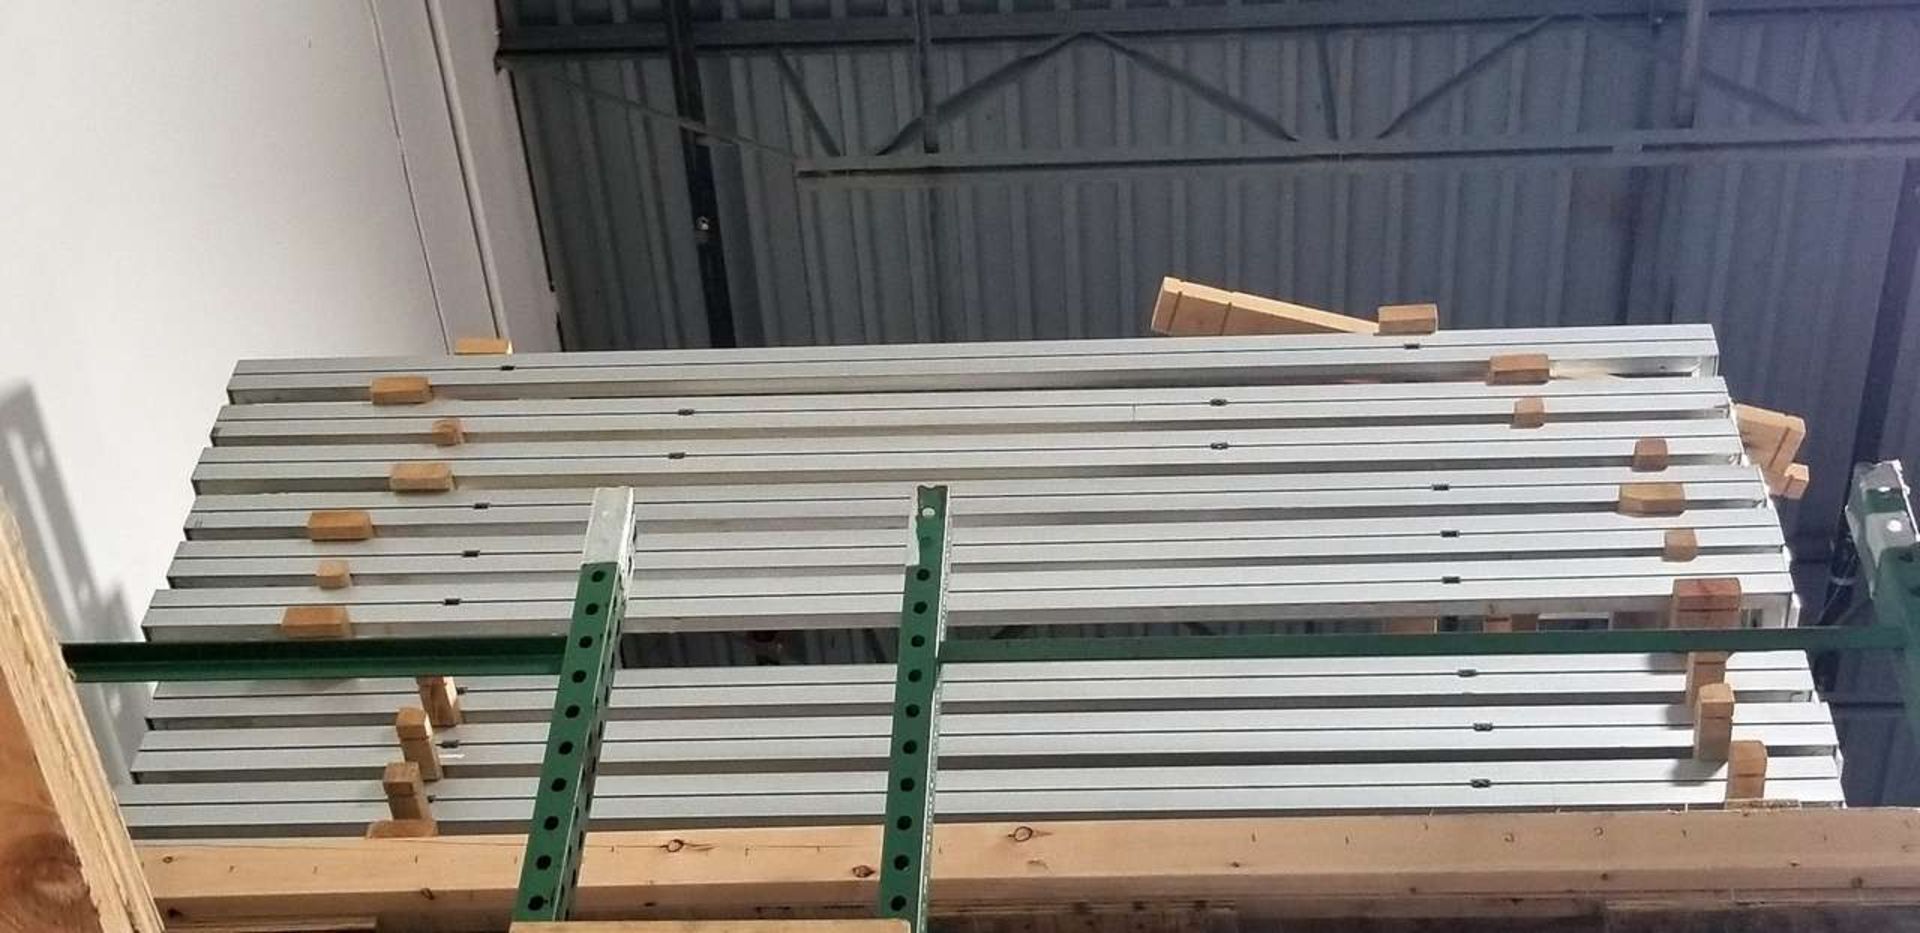 Aluminum Extrusion And Structural Framing Pieces, - Image 8 of 11